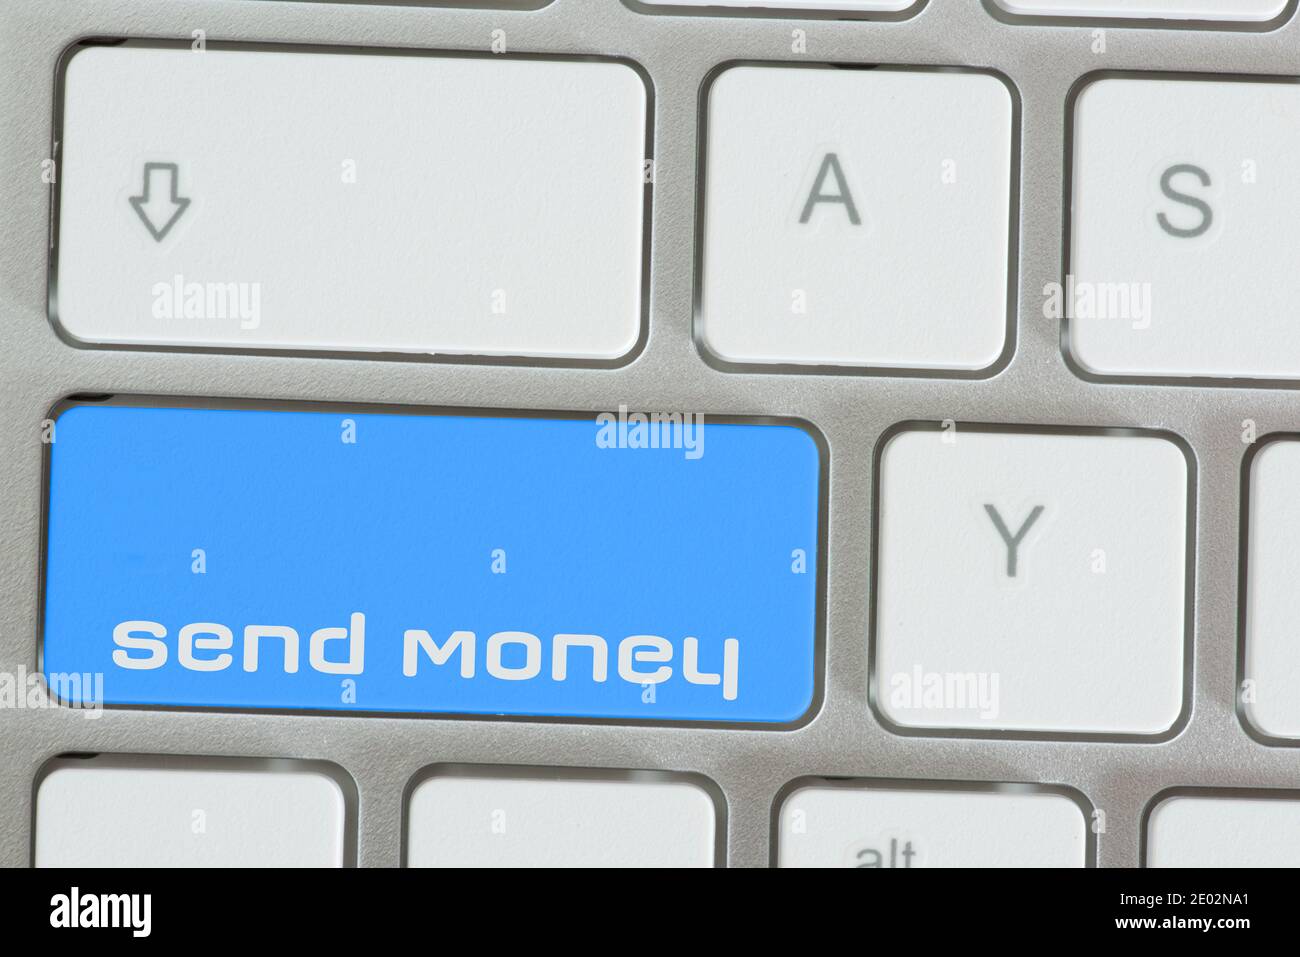 A computer and key to send money Stock Photo